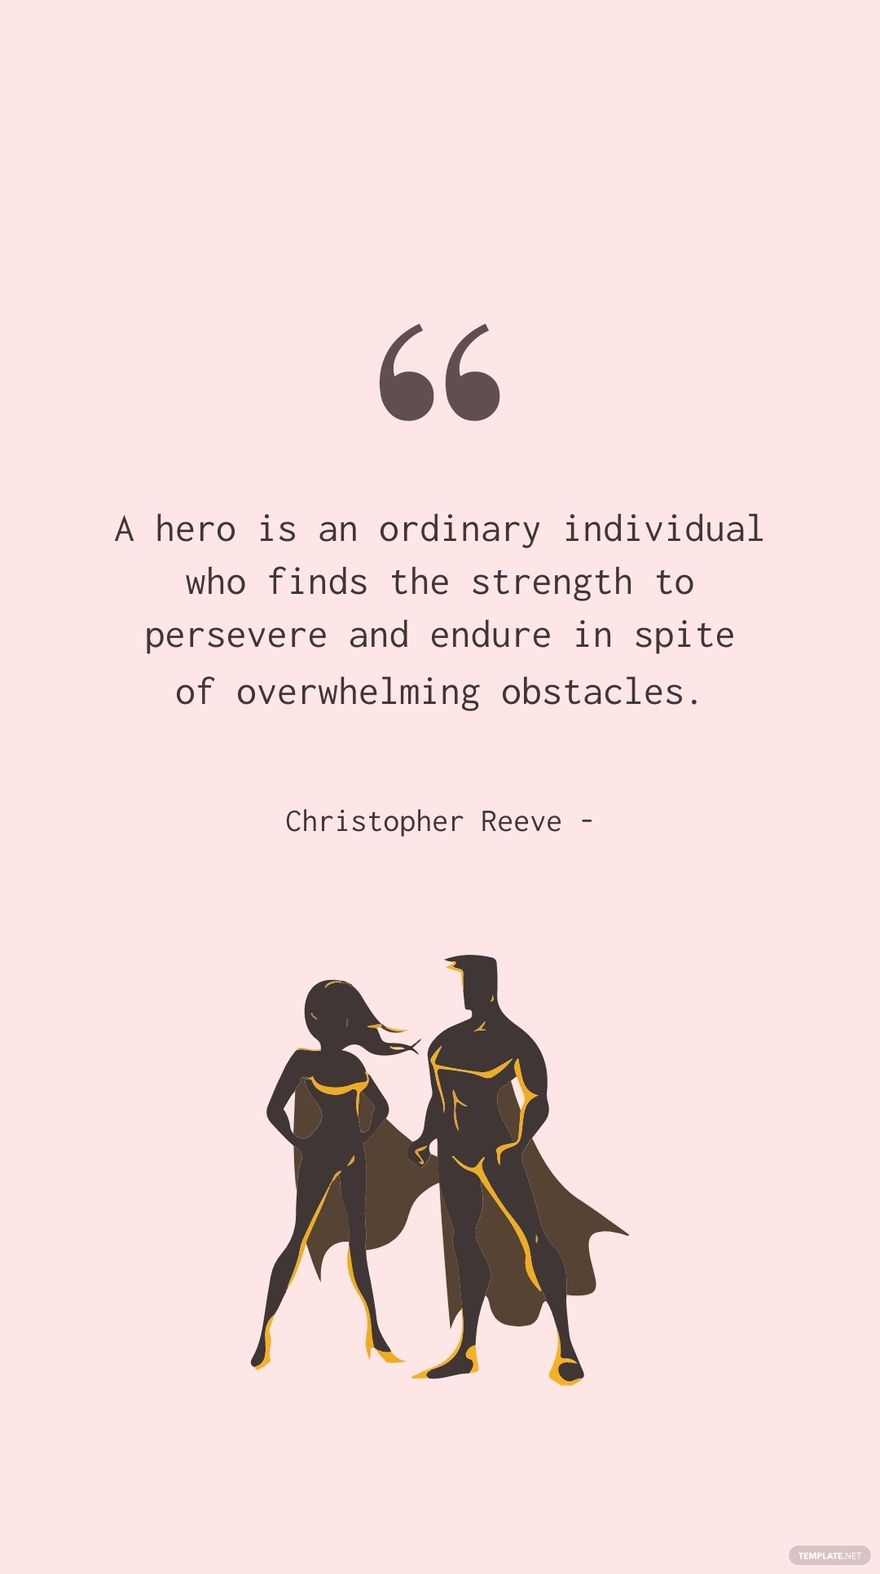 Christopher Reeve - A hero is an ordinary individual who finds the strength to persevere and endure in spite of overwhelming obstacles.